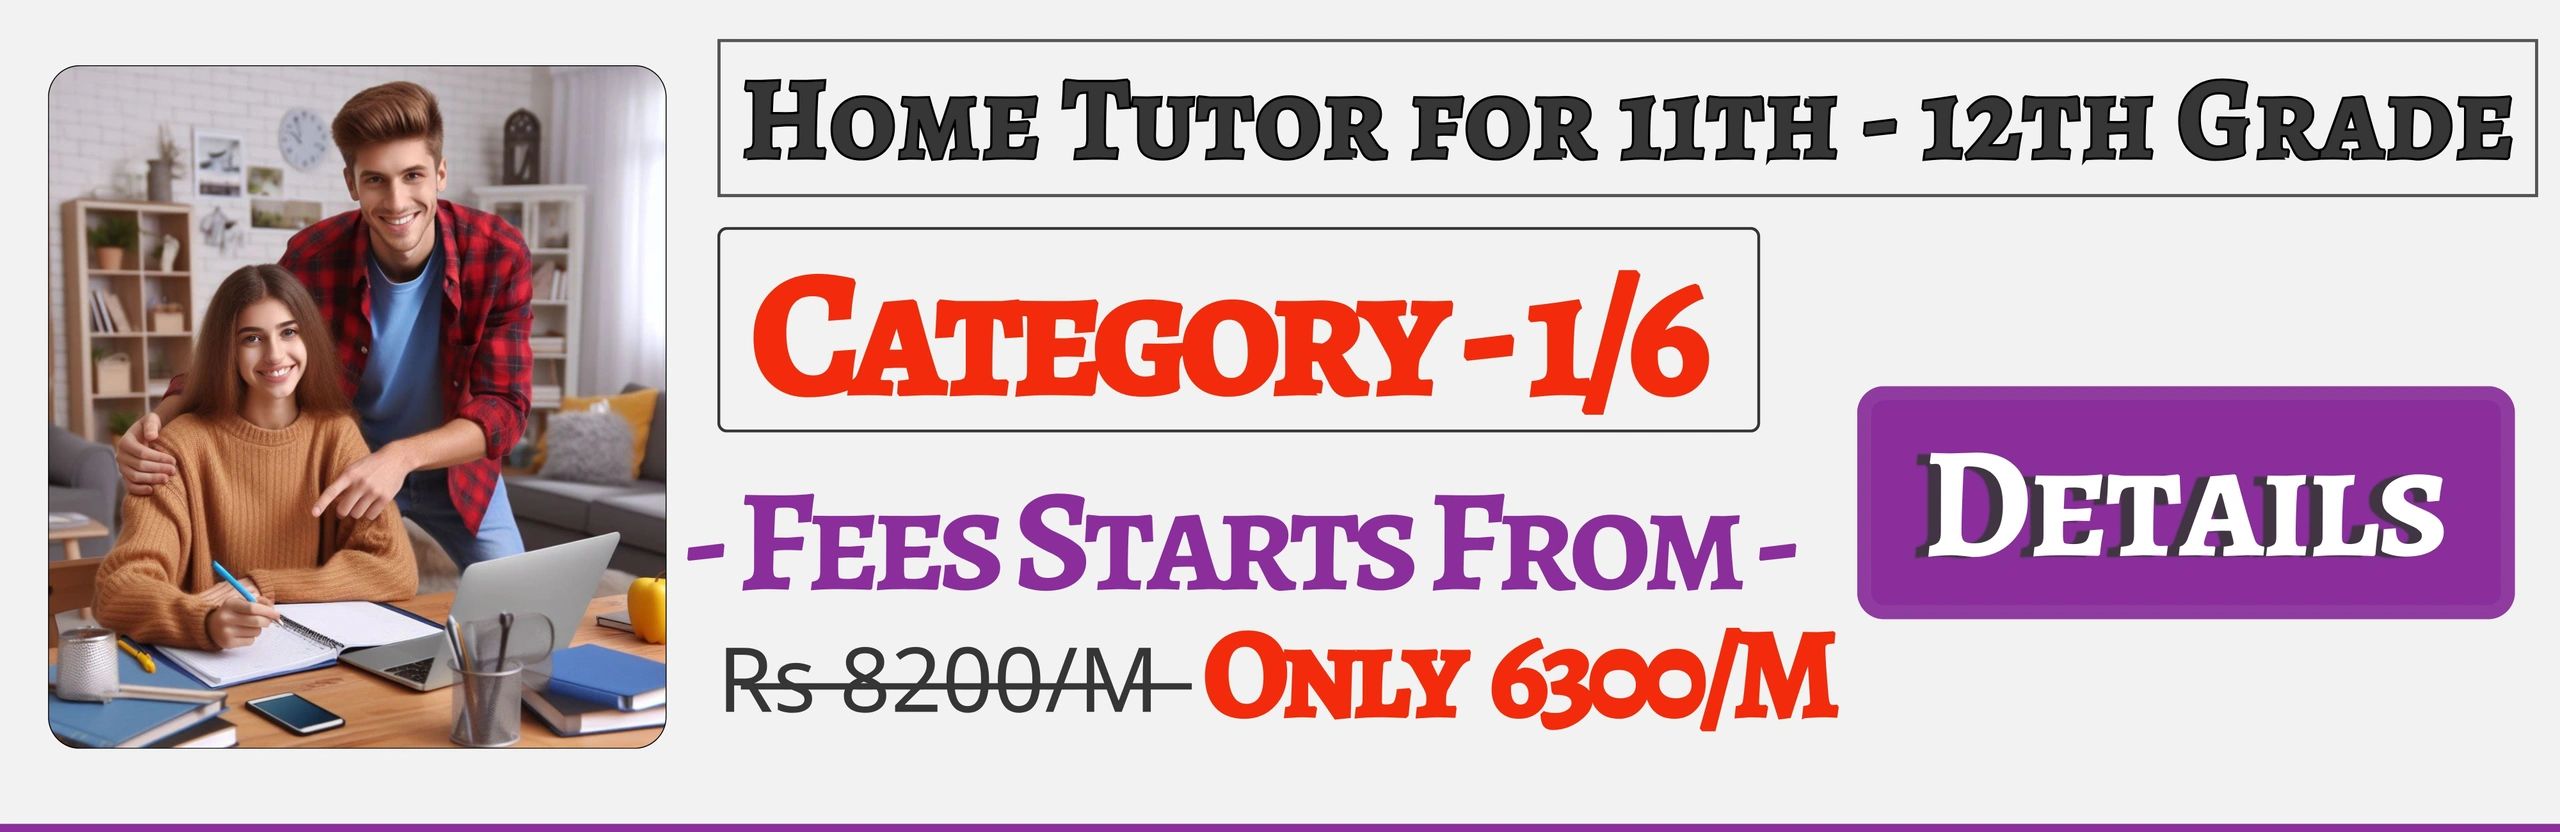 Book Best Home Tuition Tutors For 11th & 12th In Jaipur , Fees Only 6300/M